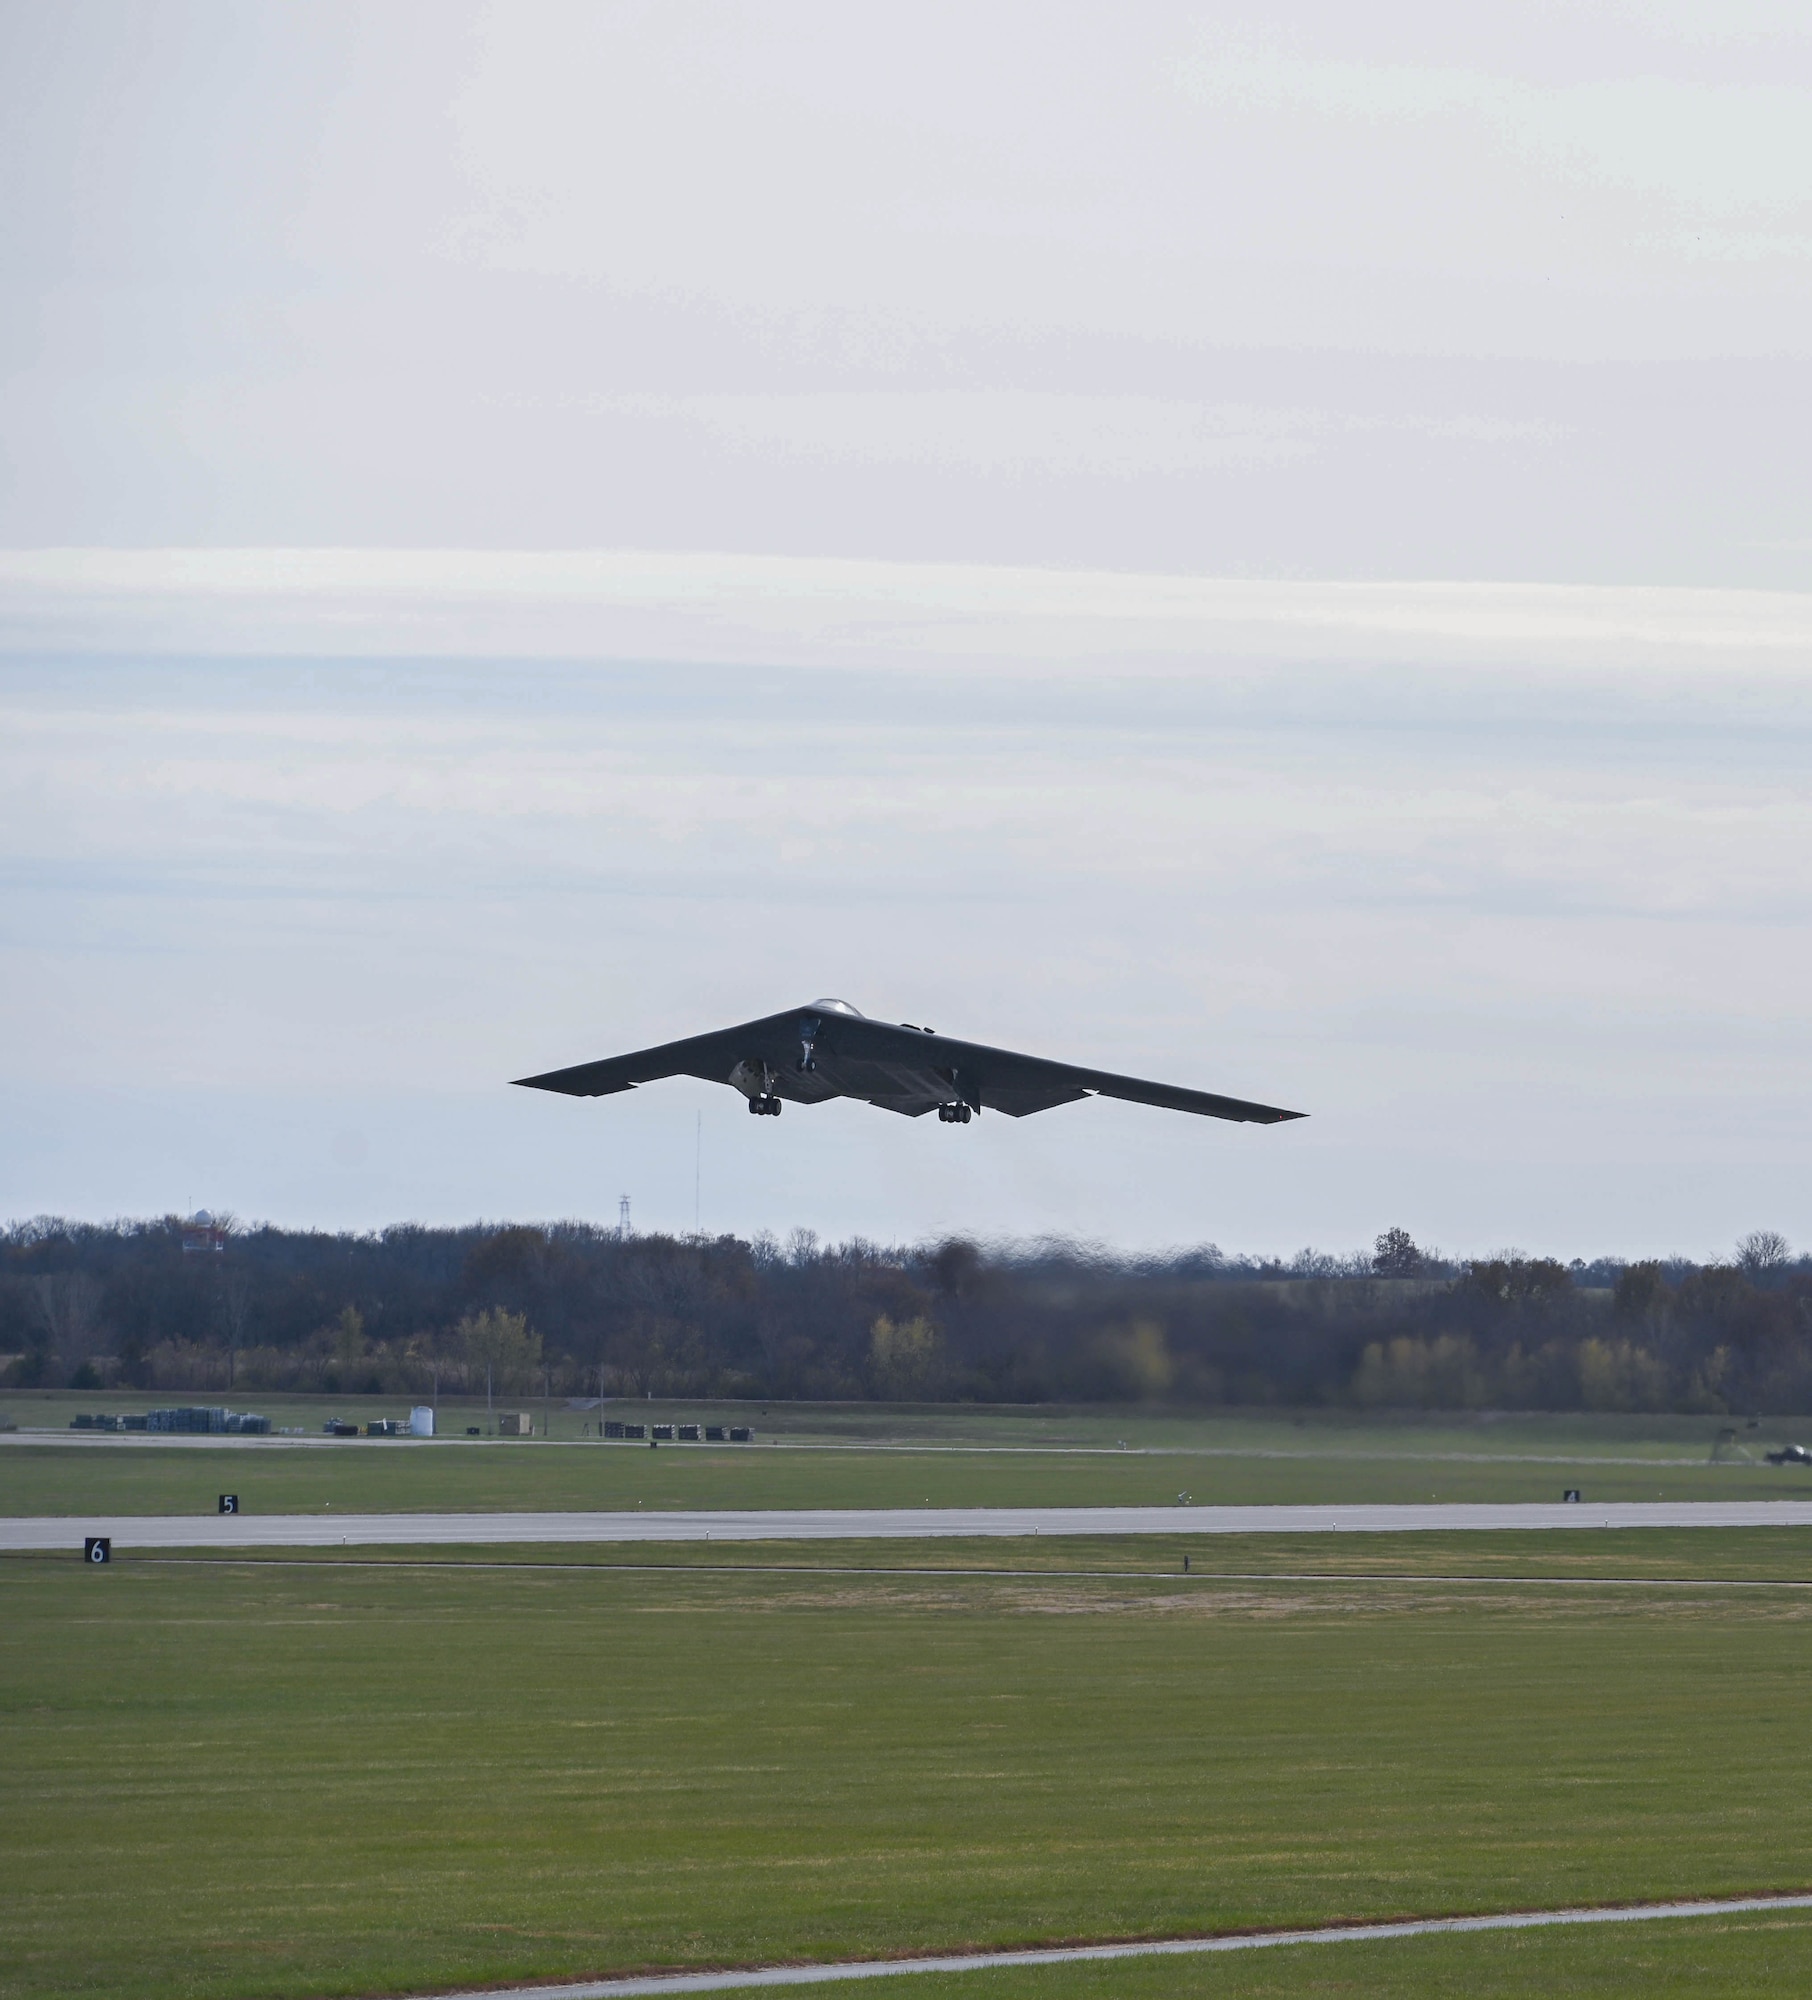 A B-2 Spirit stealth bombers assigned to the 509th Bomb Wing takes off at Whiteman Air Force Base, Missouri November 7, 2022. The B-2 participated in Spirit Vigilance, a routine training exercise designed to test the wing's readiness to conduct deterrence and combat operations. (U.S. Air Force photo by Airman 1st Class Hailey Farrell)